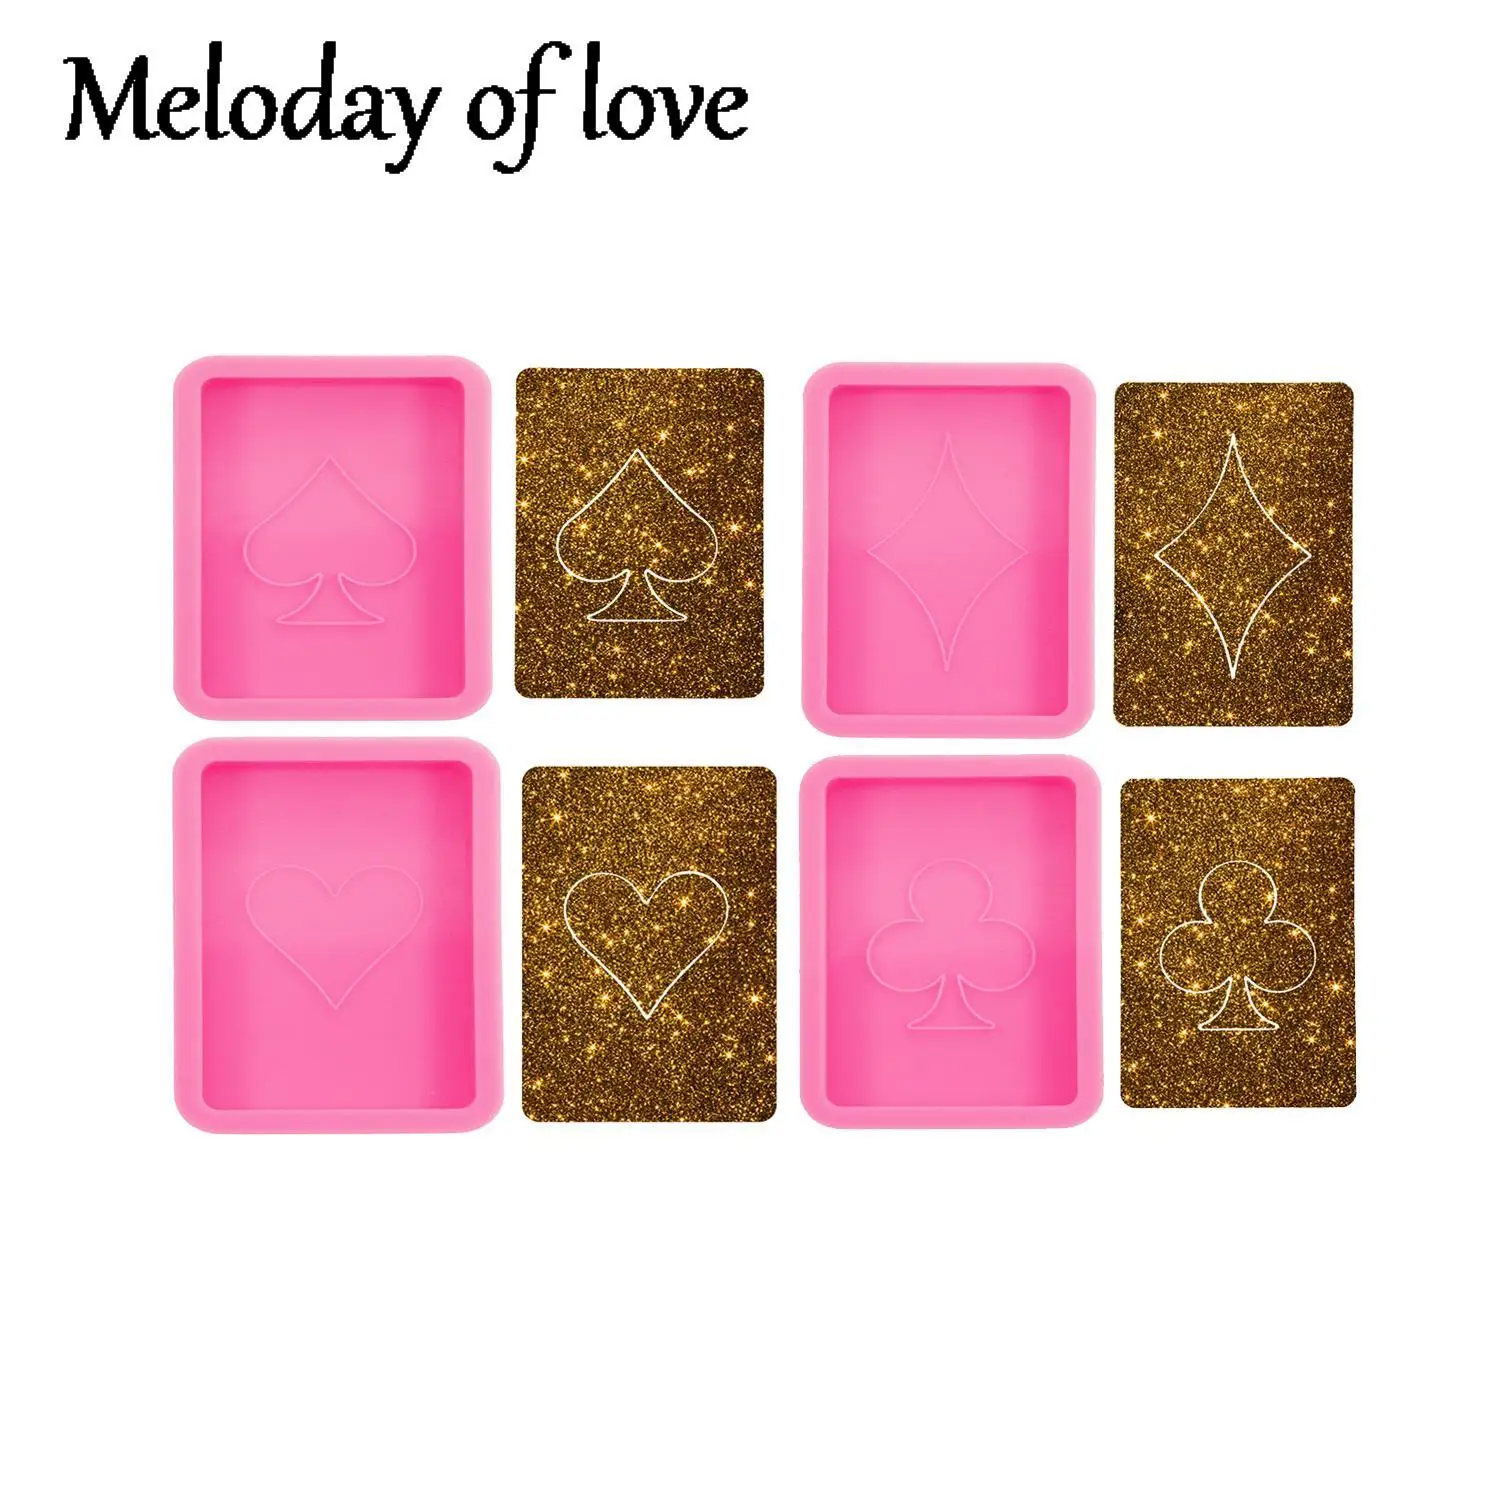 

Super Glossy Poker Silicone Mold Resin Crafting Epoxy DIY Handmade Soap Mold, Playing Card Fondant Chocolate Cake Molds DY1518